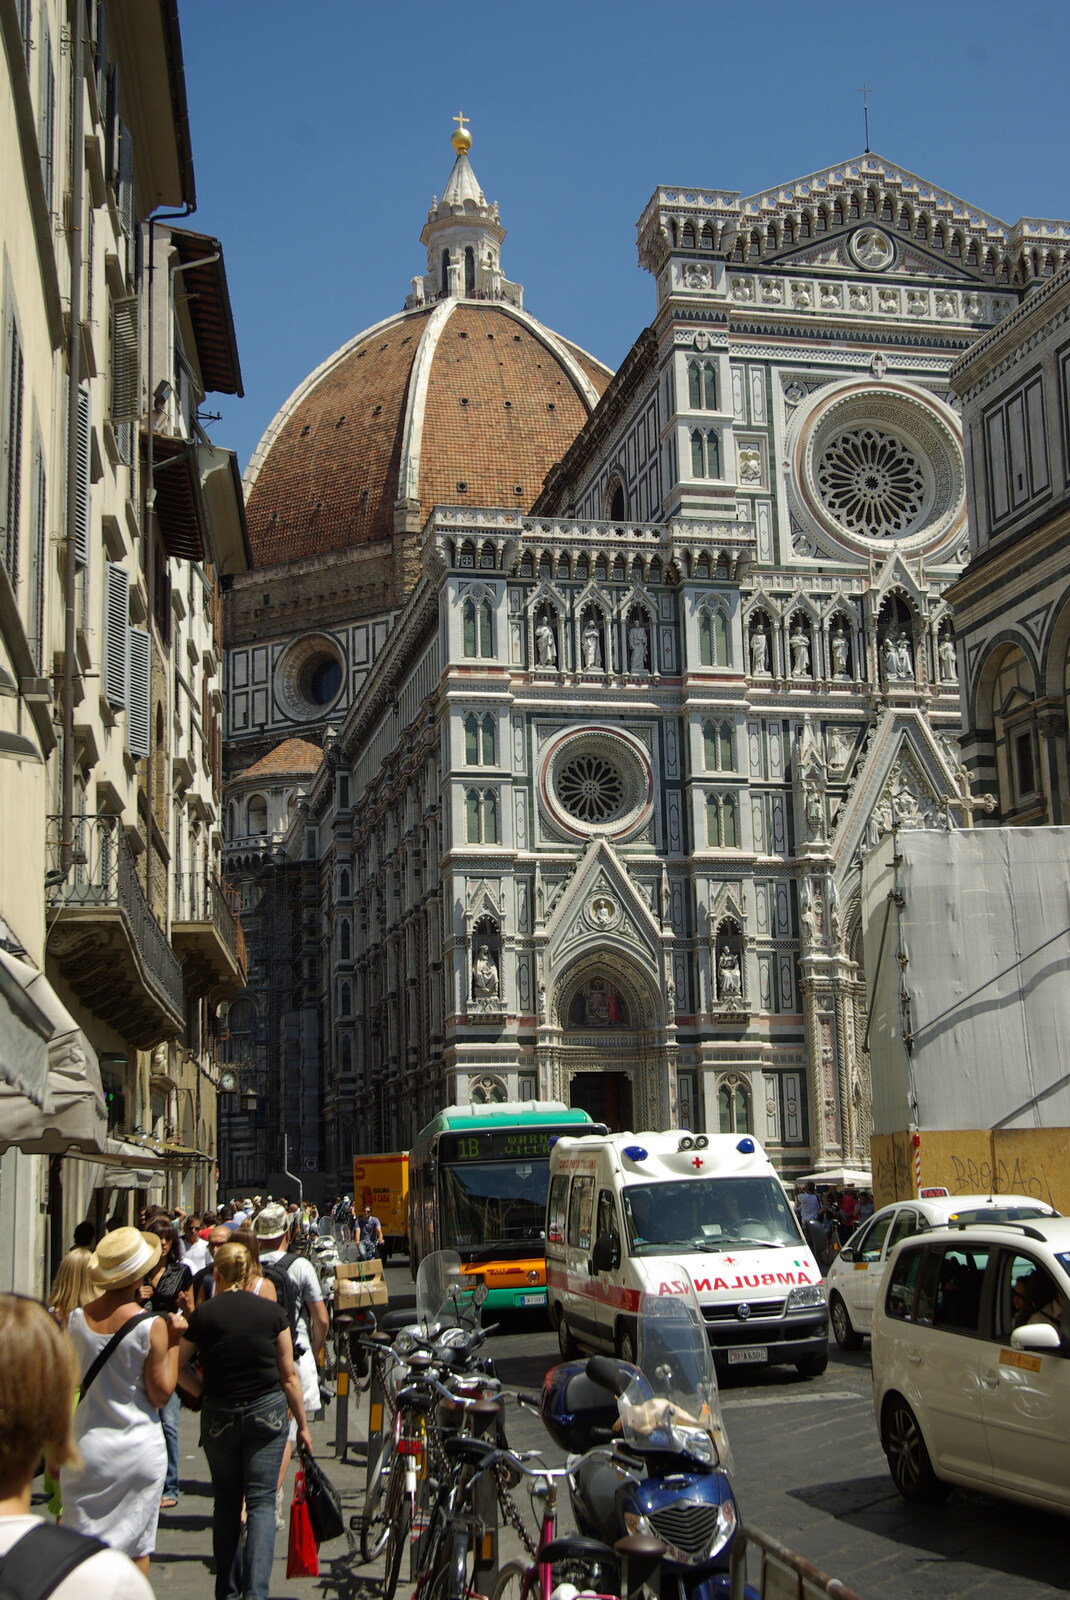 A Day Trip to Firenze, Tuscany, Italy - 24th July 2008: A first sighting of Il Duomo